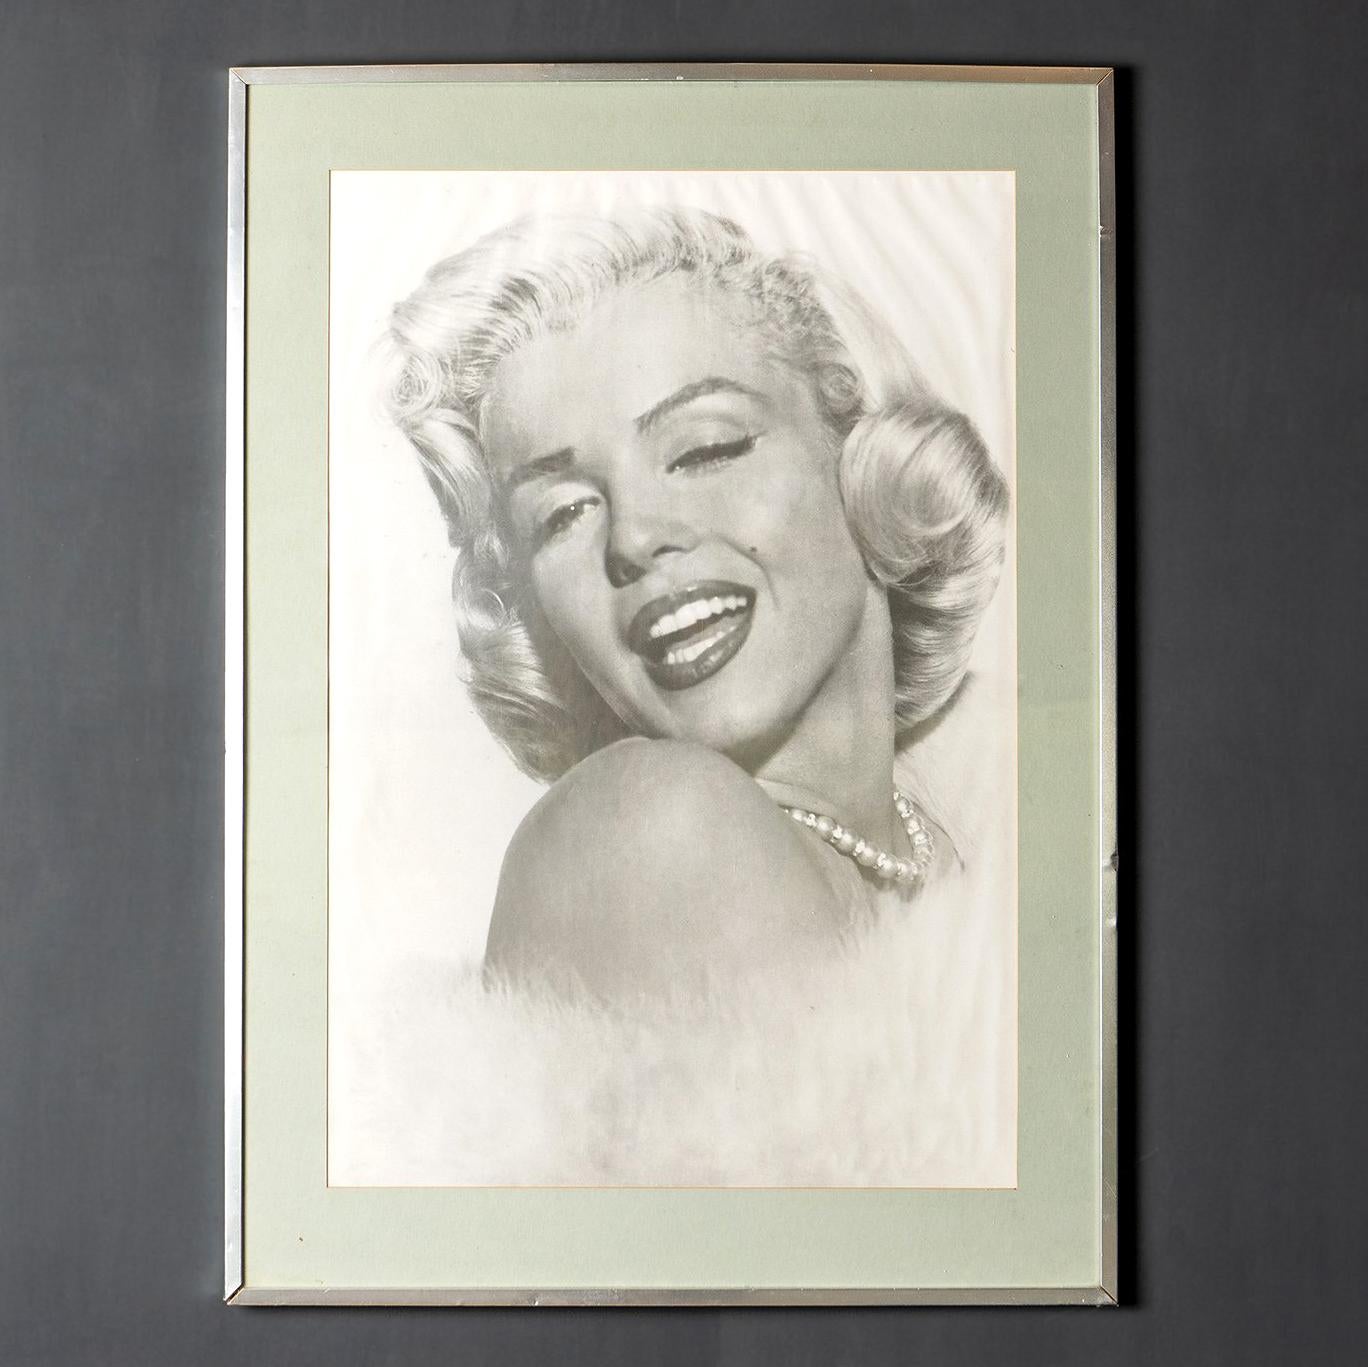 Mid-Century Photography Print Poster

Depicting the iconic Marilyn with typical hair and make-up, a pearl necklace, a white fur stole and that oh-so-familiar glint in her eye.

The photograph dates from 1953, around the time of her film ‘How to